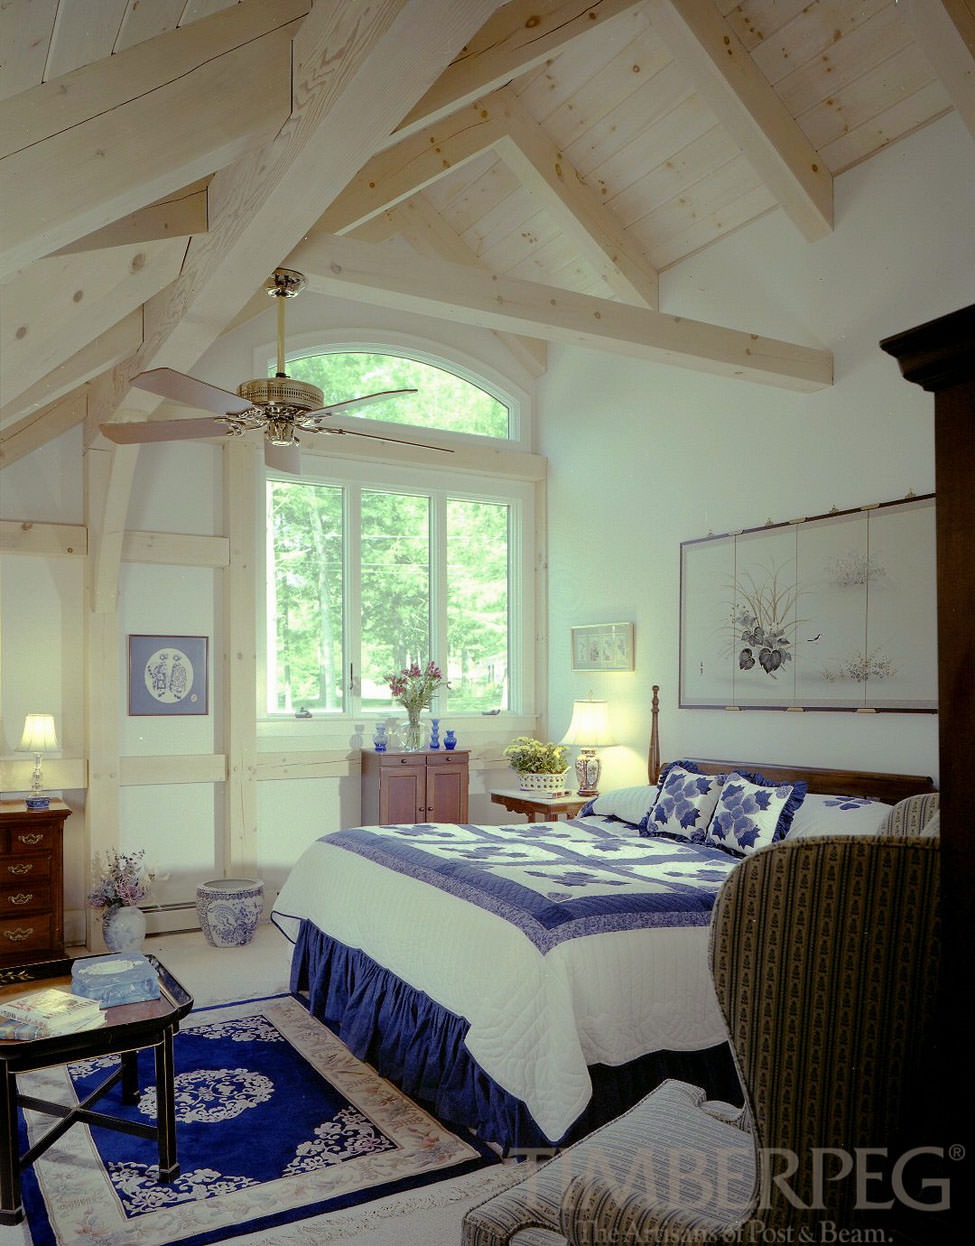 Lake Shore, NH (4226) bedroom with cathedral ceiling